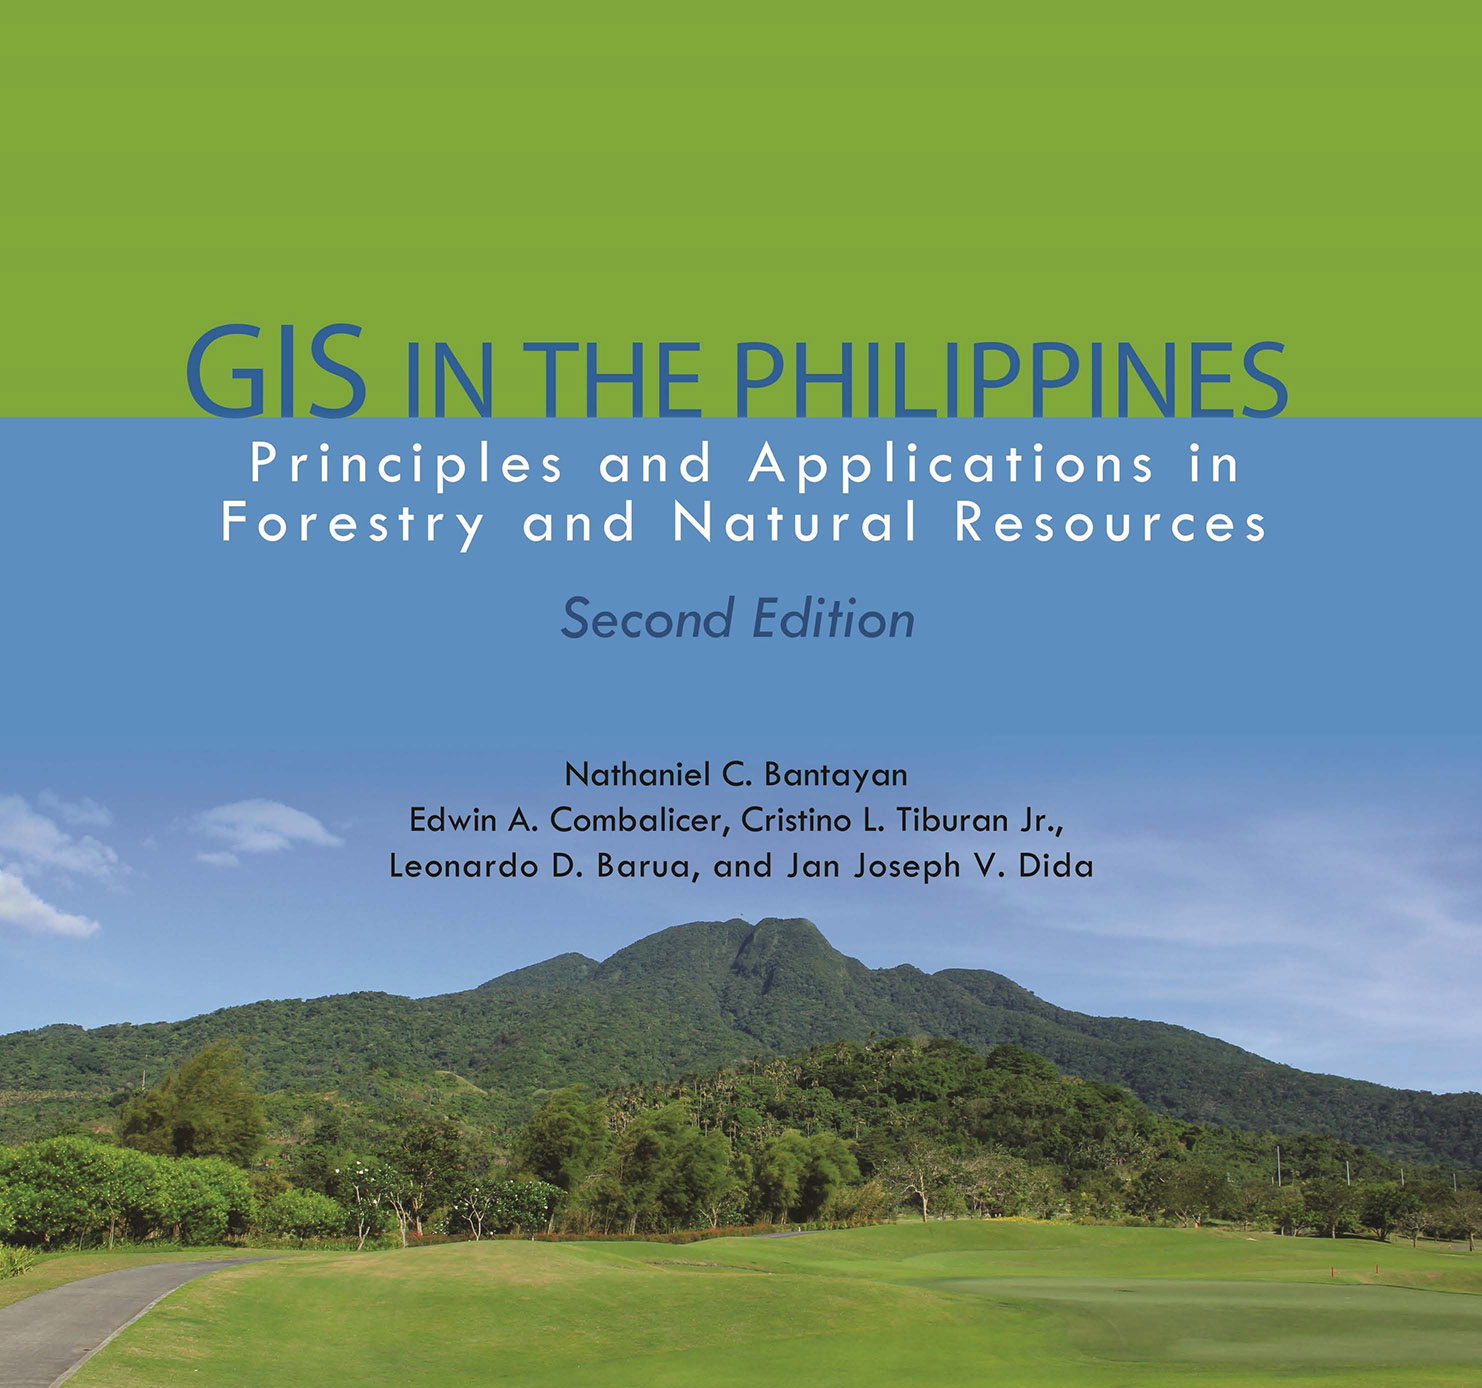 GIS in the Philippines 2nd Edition Book Cover